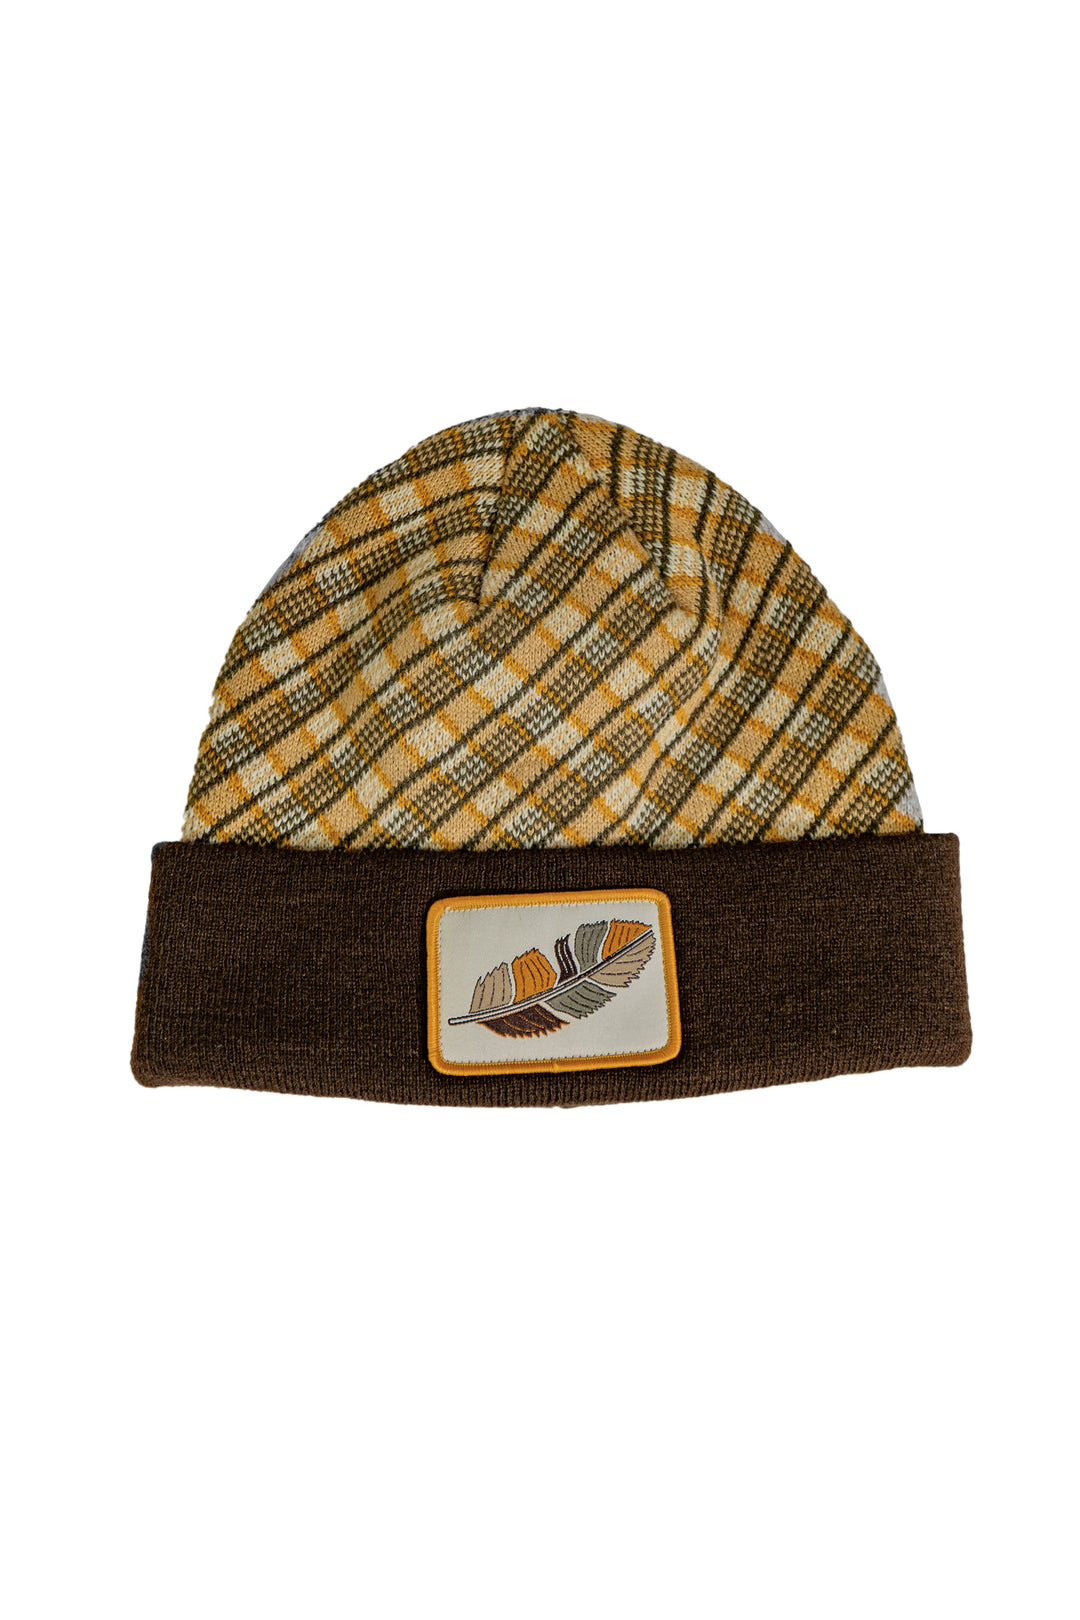 Consistent Progress Plaid Embroidered Patch Beanie